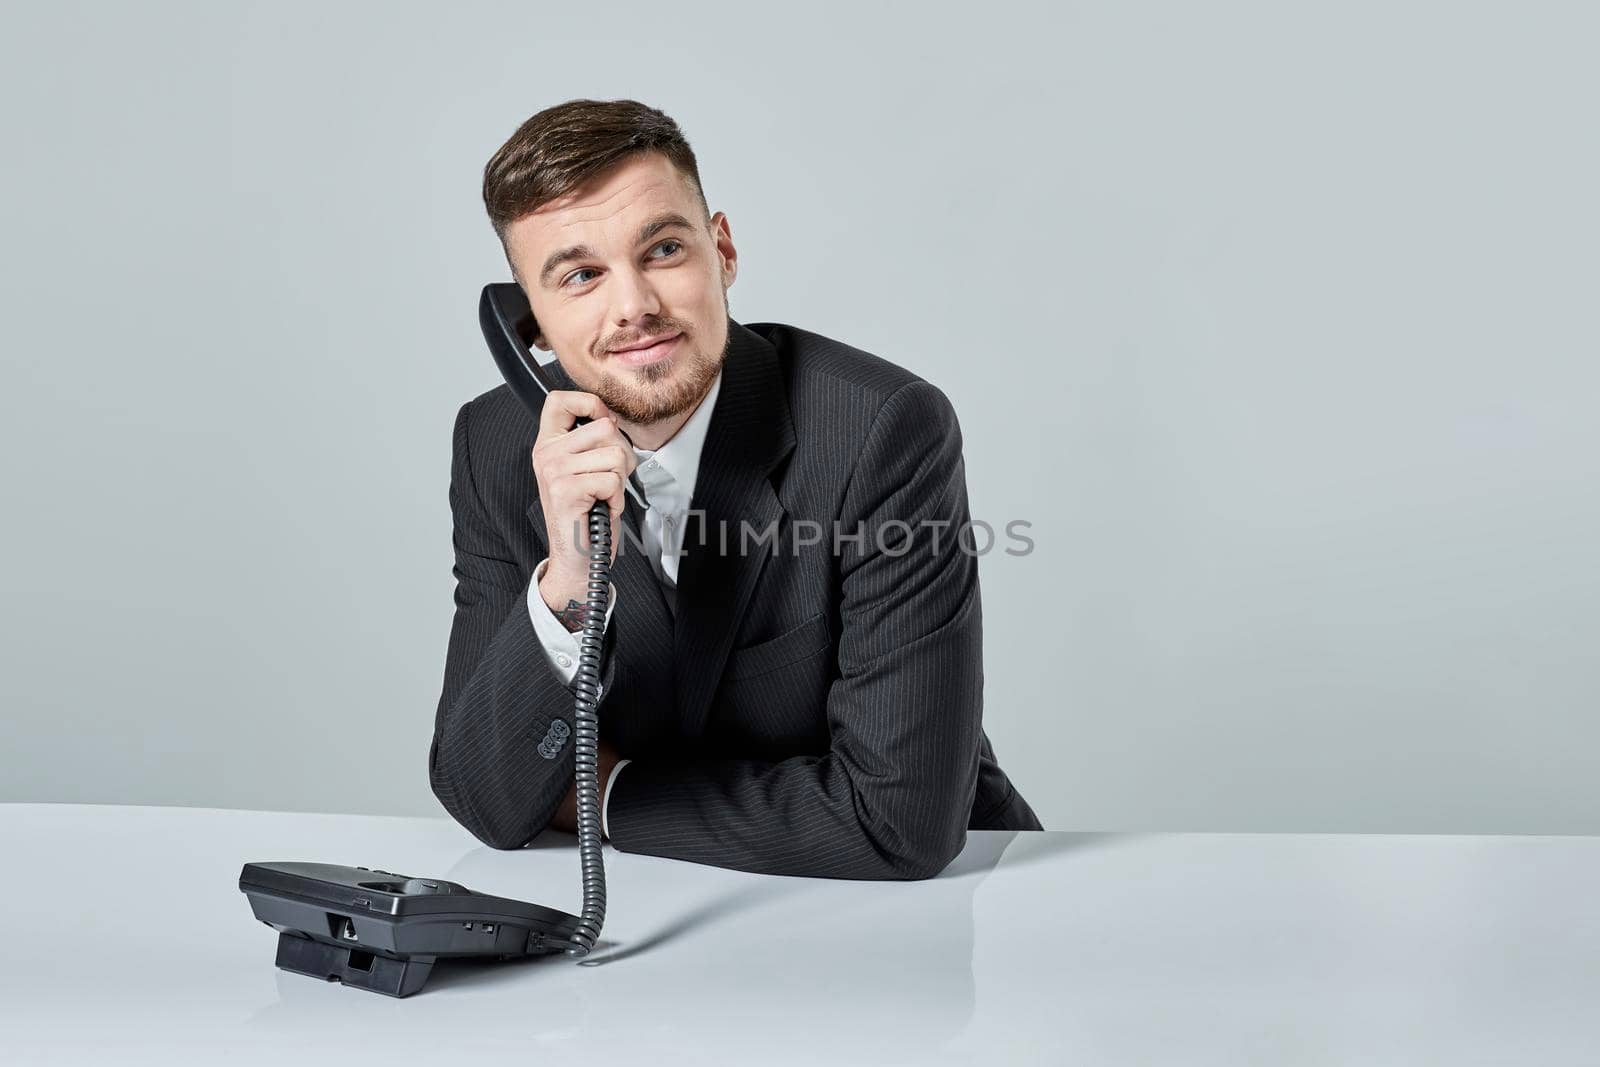 A young man in a black suit dials the phone number while sitting in the office. Manager talking on the phone